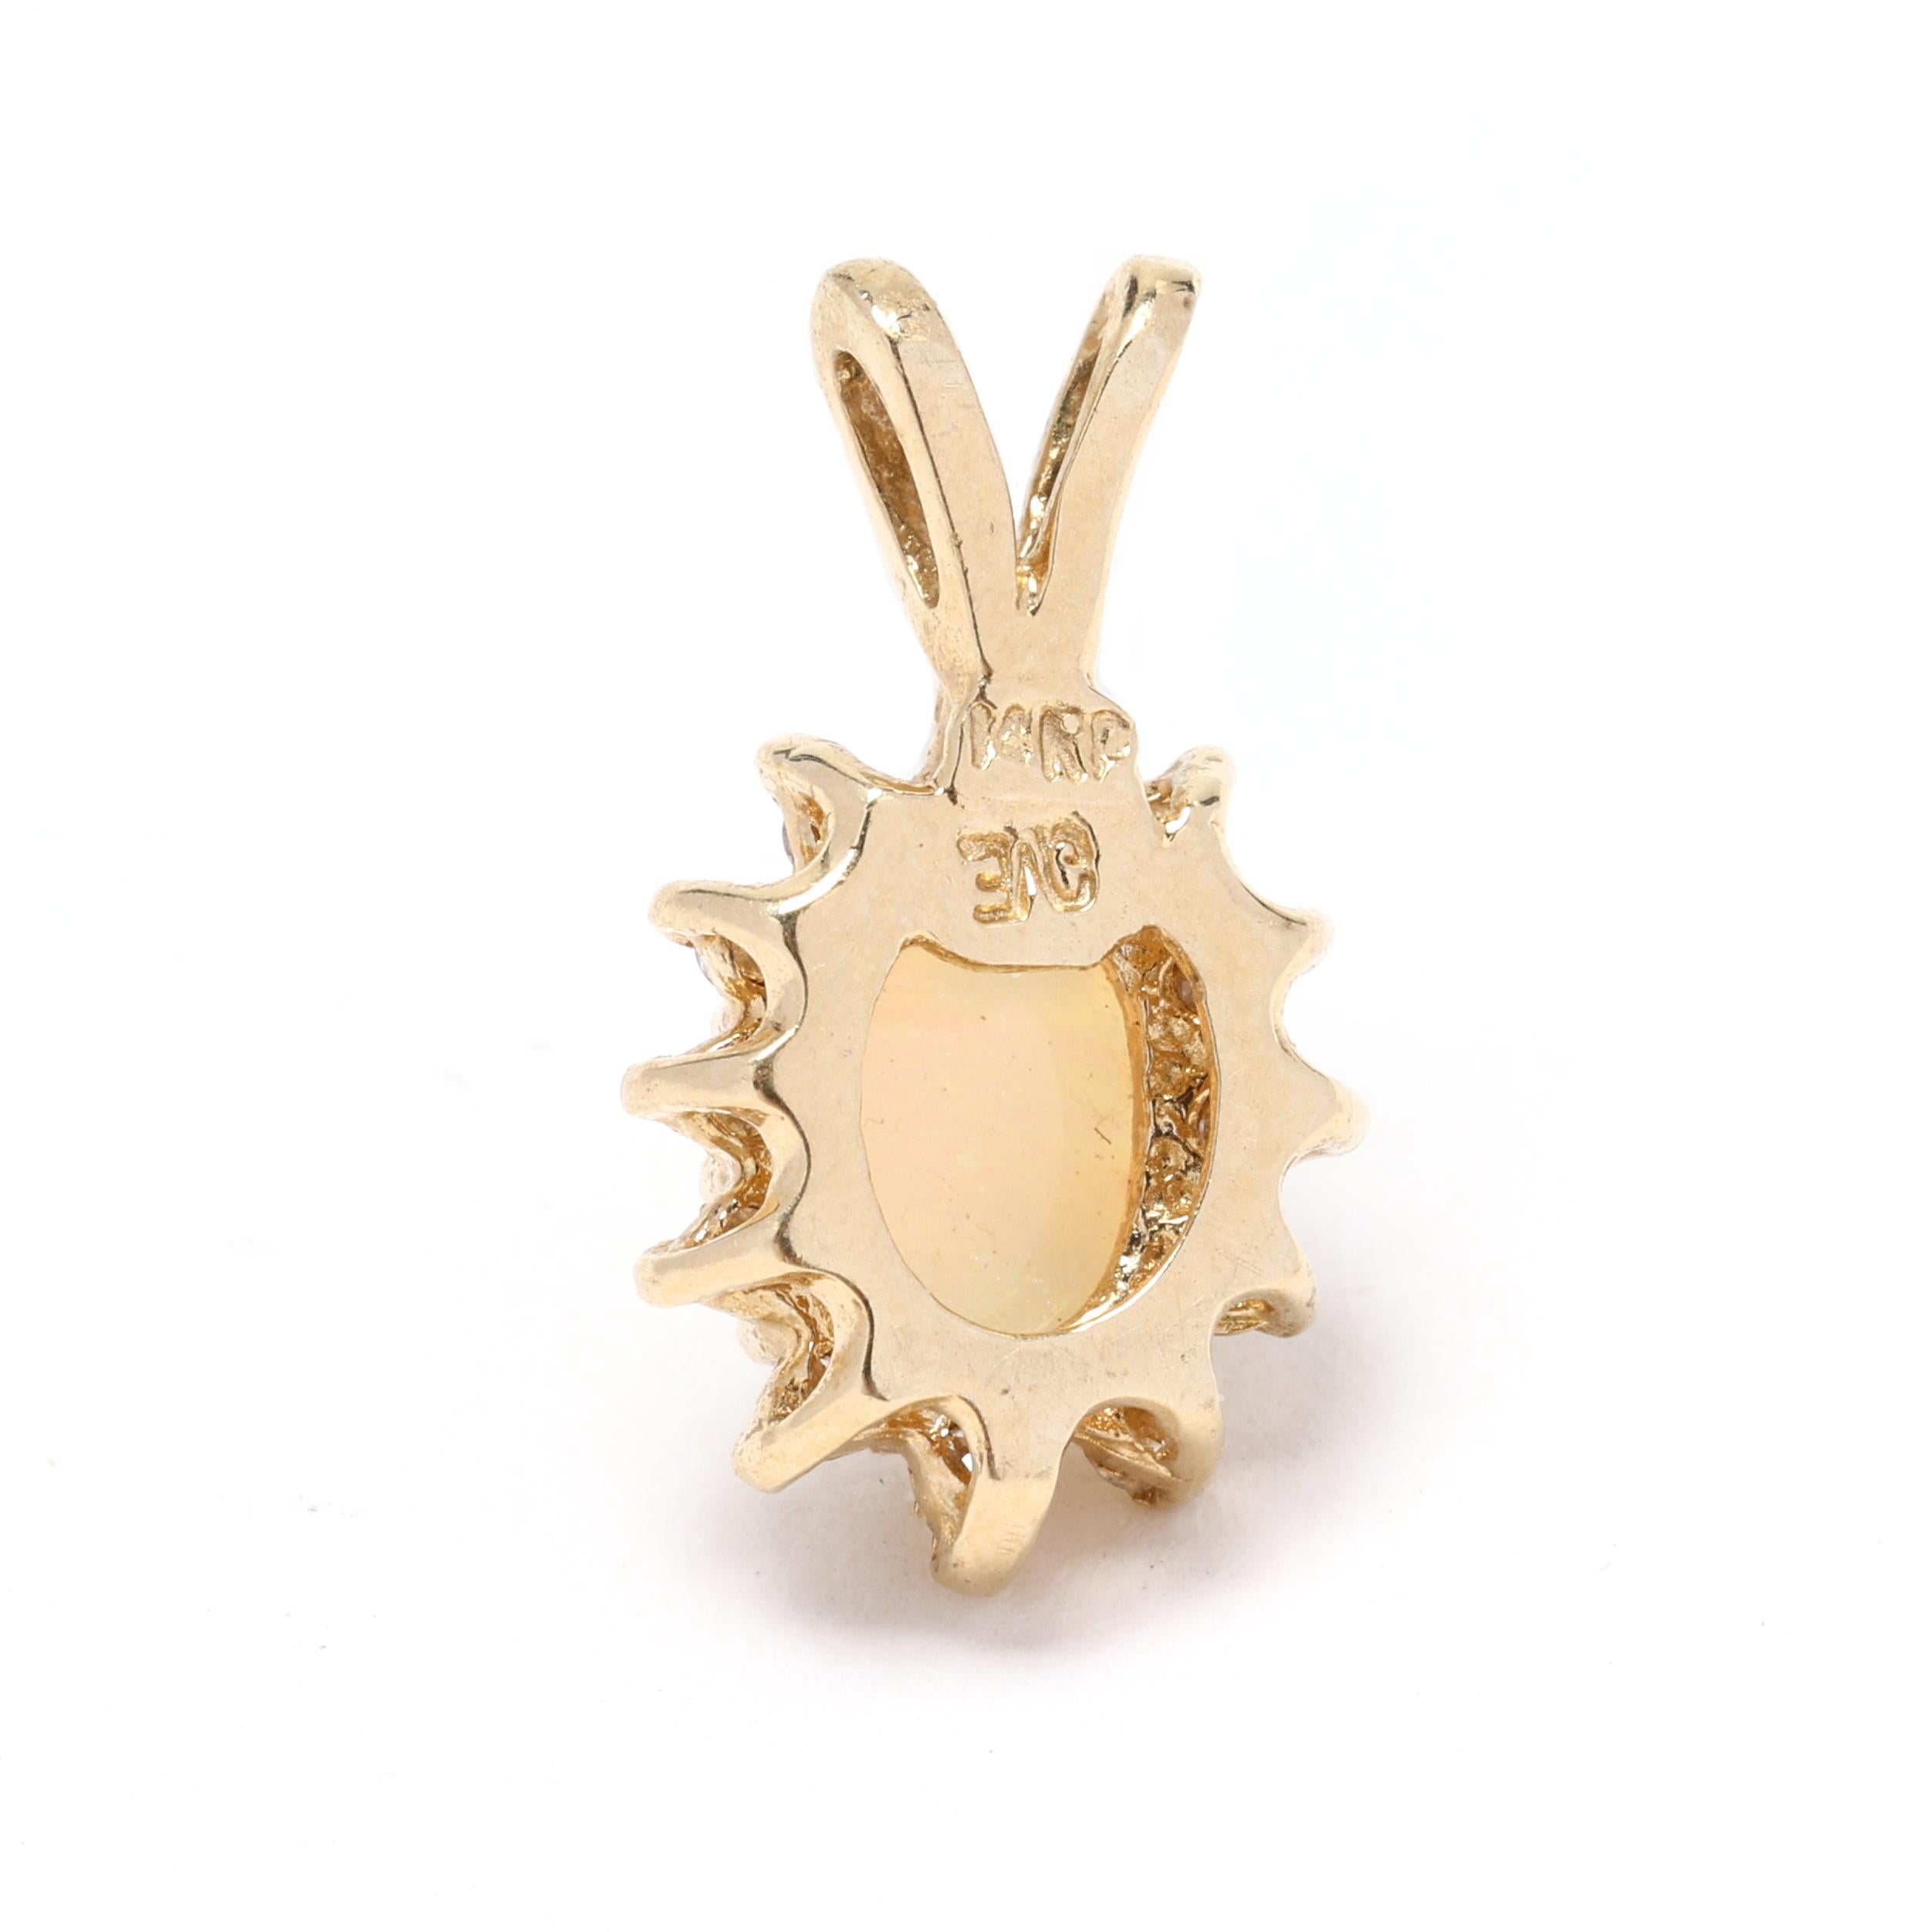 This 14k yellow gold diamond and opal pendant is a beautiful and eye-catching piece of jewelry. Crafted with high-quality gold, this pendant features a dainty design that adds a touch of elegance to any outfit. The pendant showcases a stunning opal